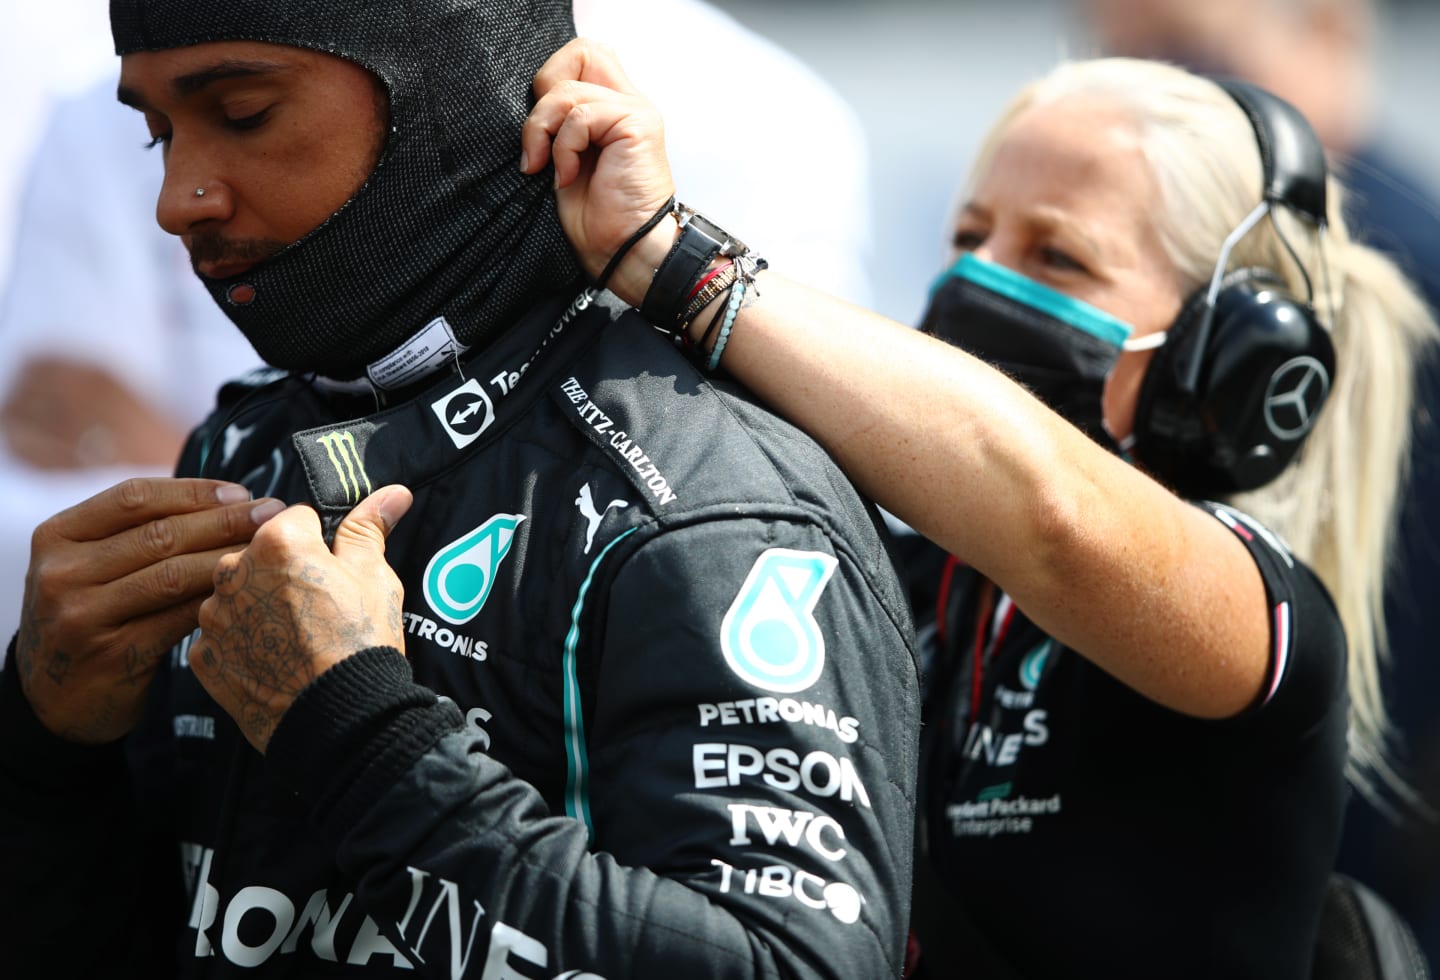 SPIELBERG, AUSTRIA - JULY 04: Lewis Hamilton of Great Britain and Mercedes GP prepares to drive on